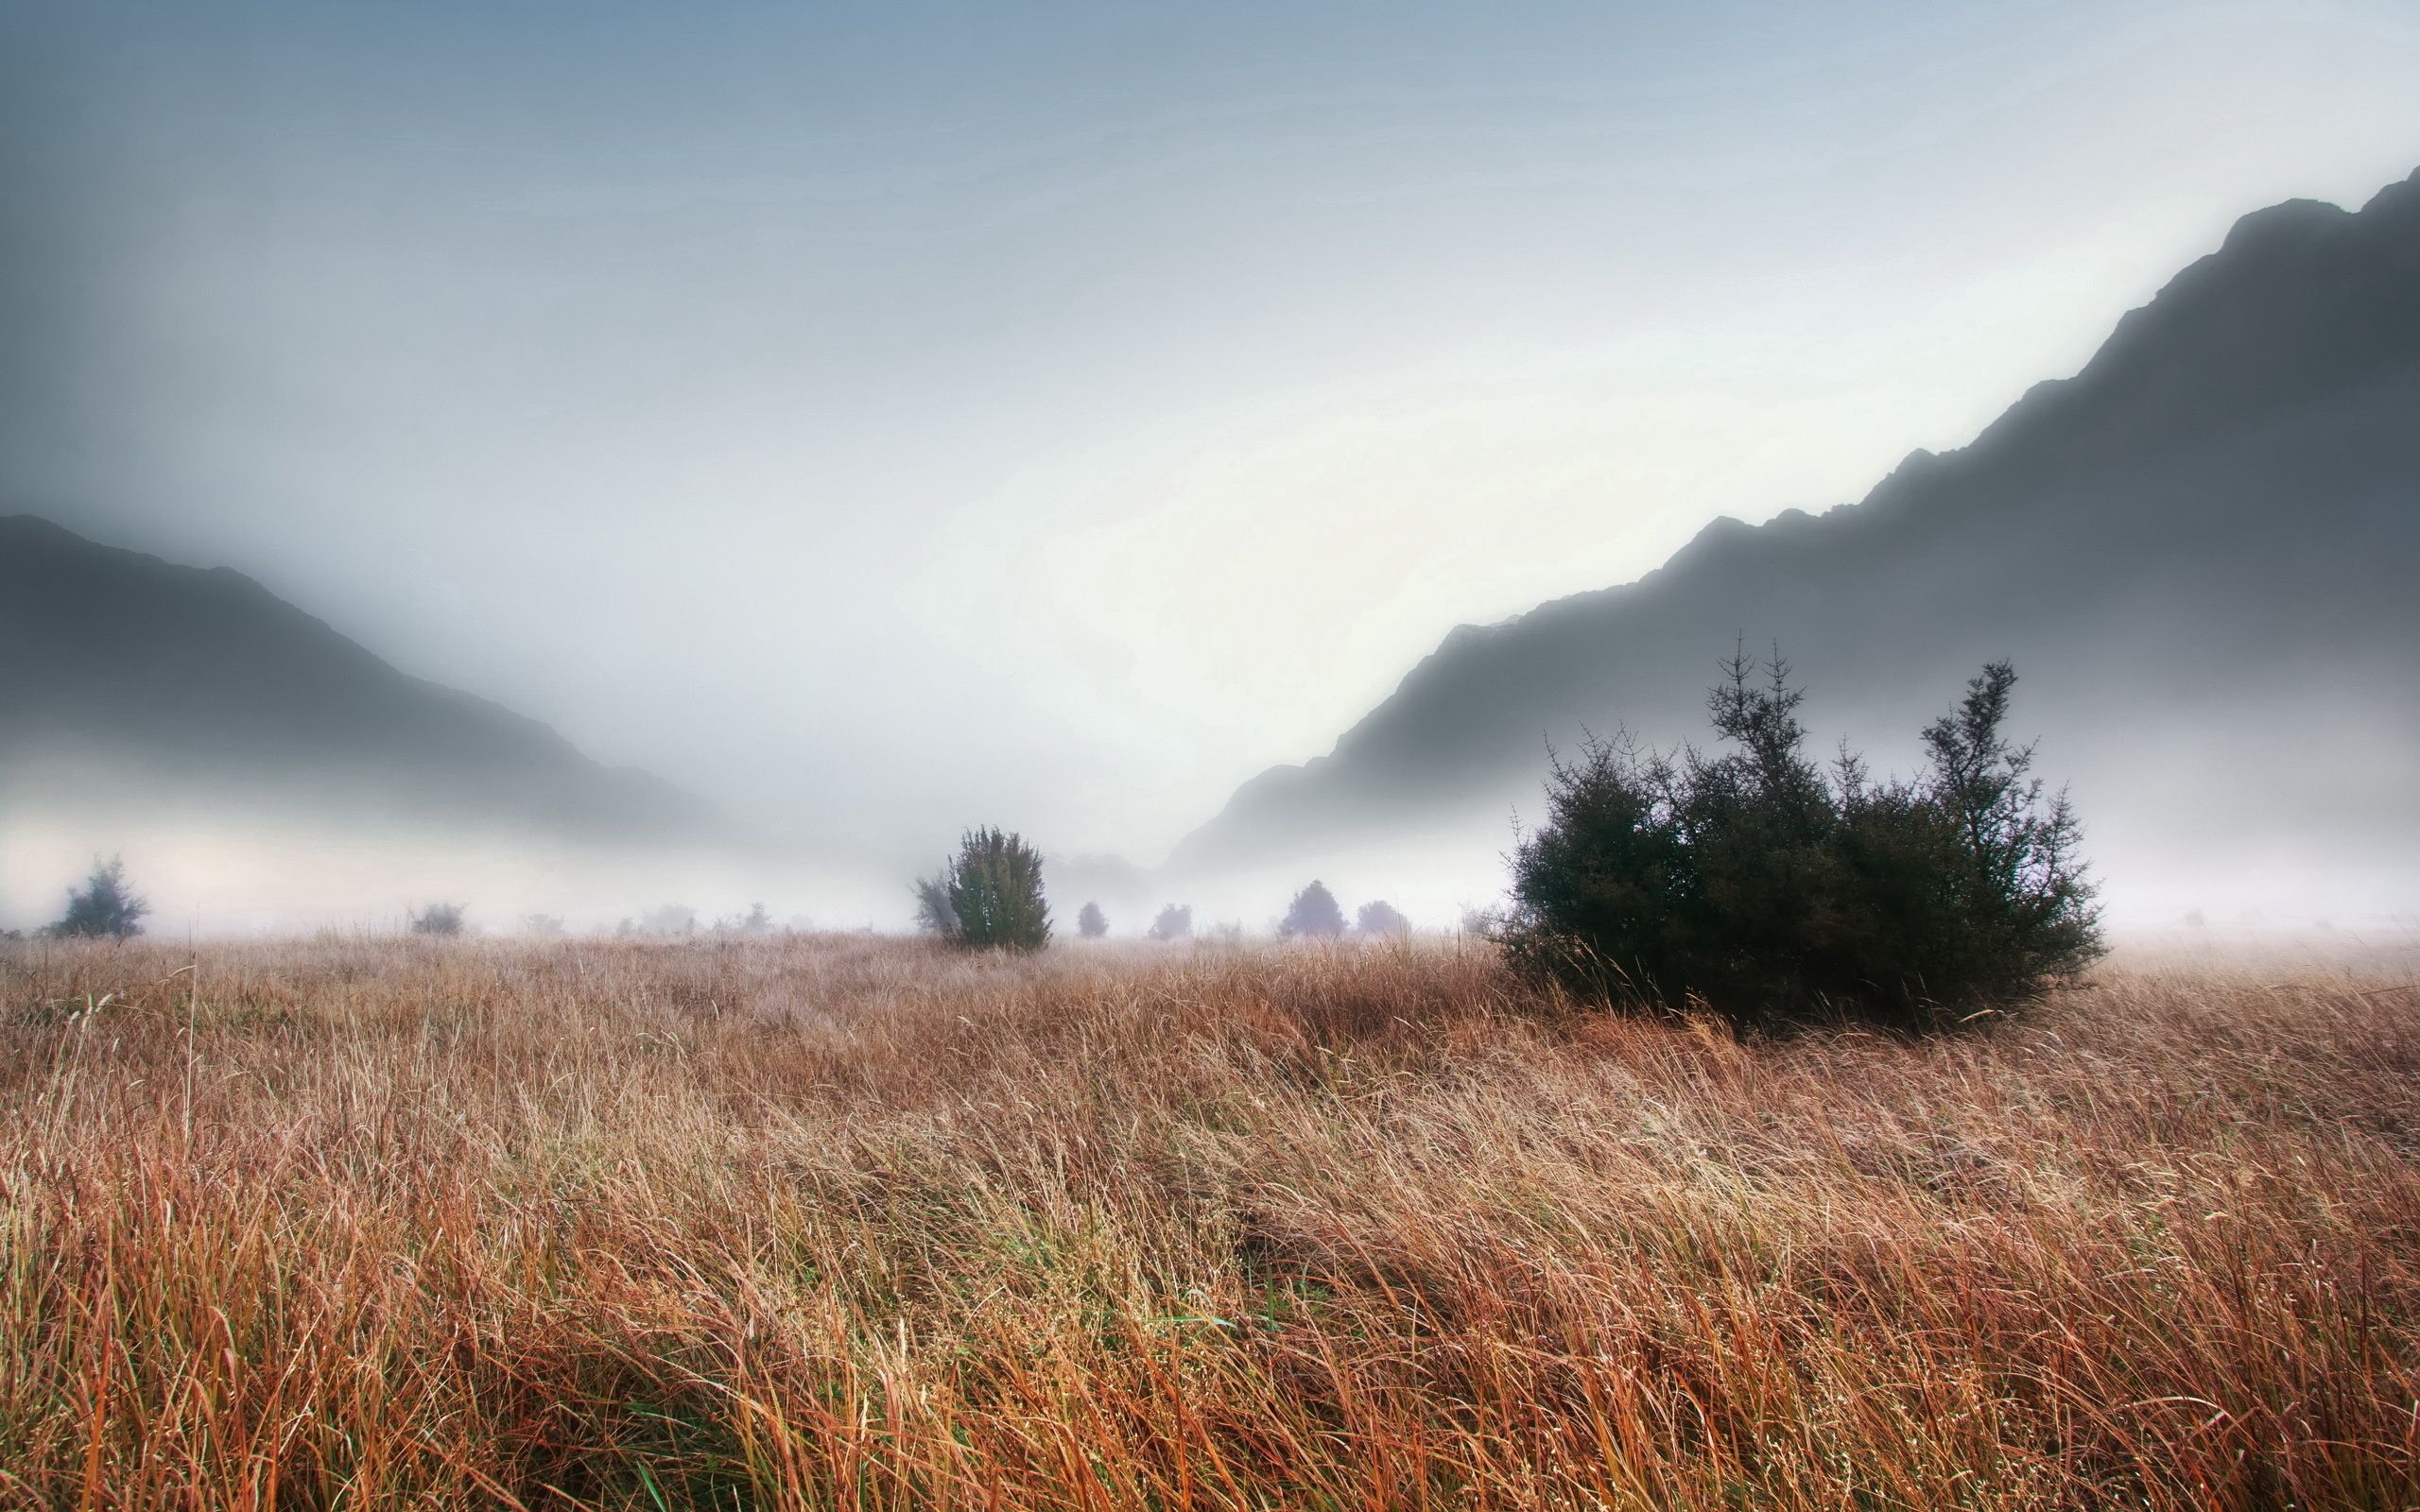 creepy, nature, grass, mountains, autumn, fog, thick, withered, it's a sly, haze, gloomy, ate